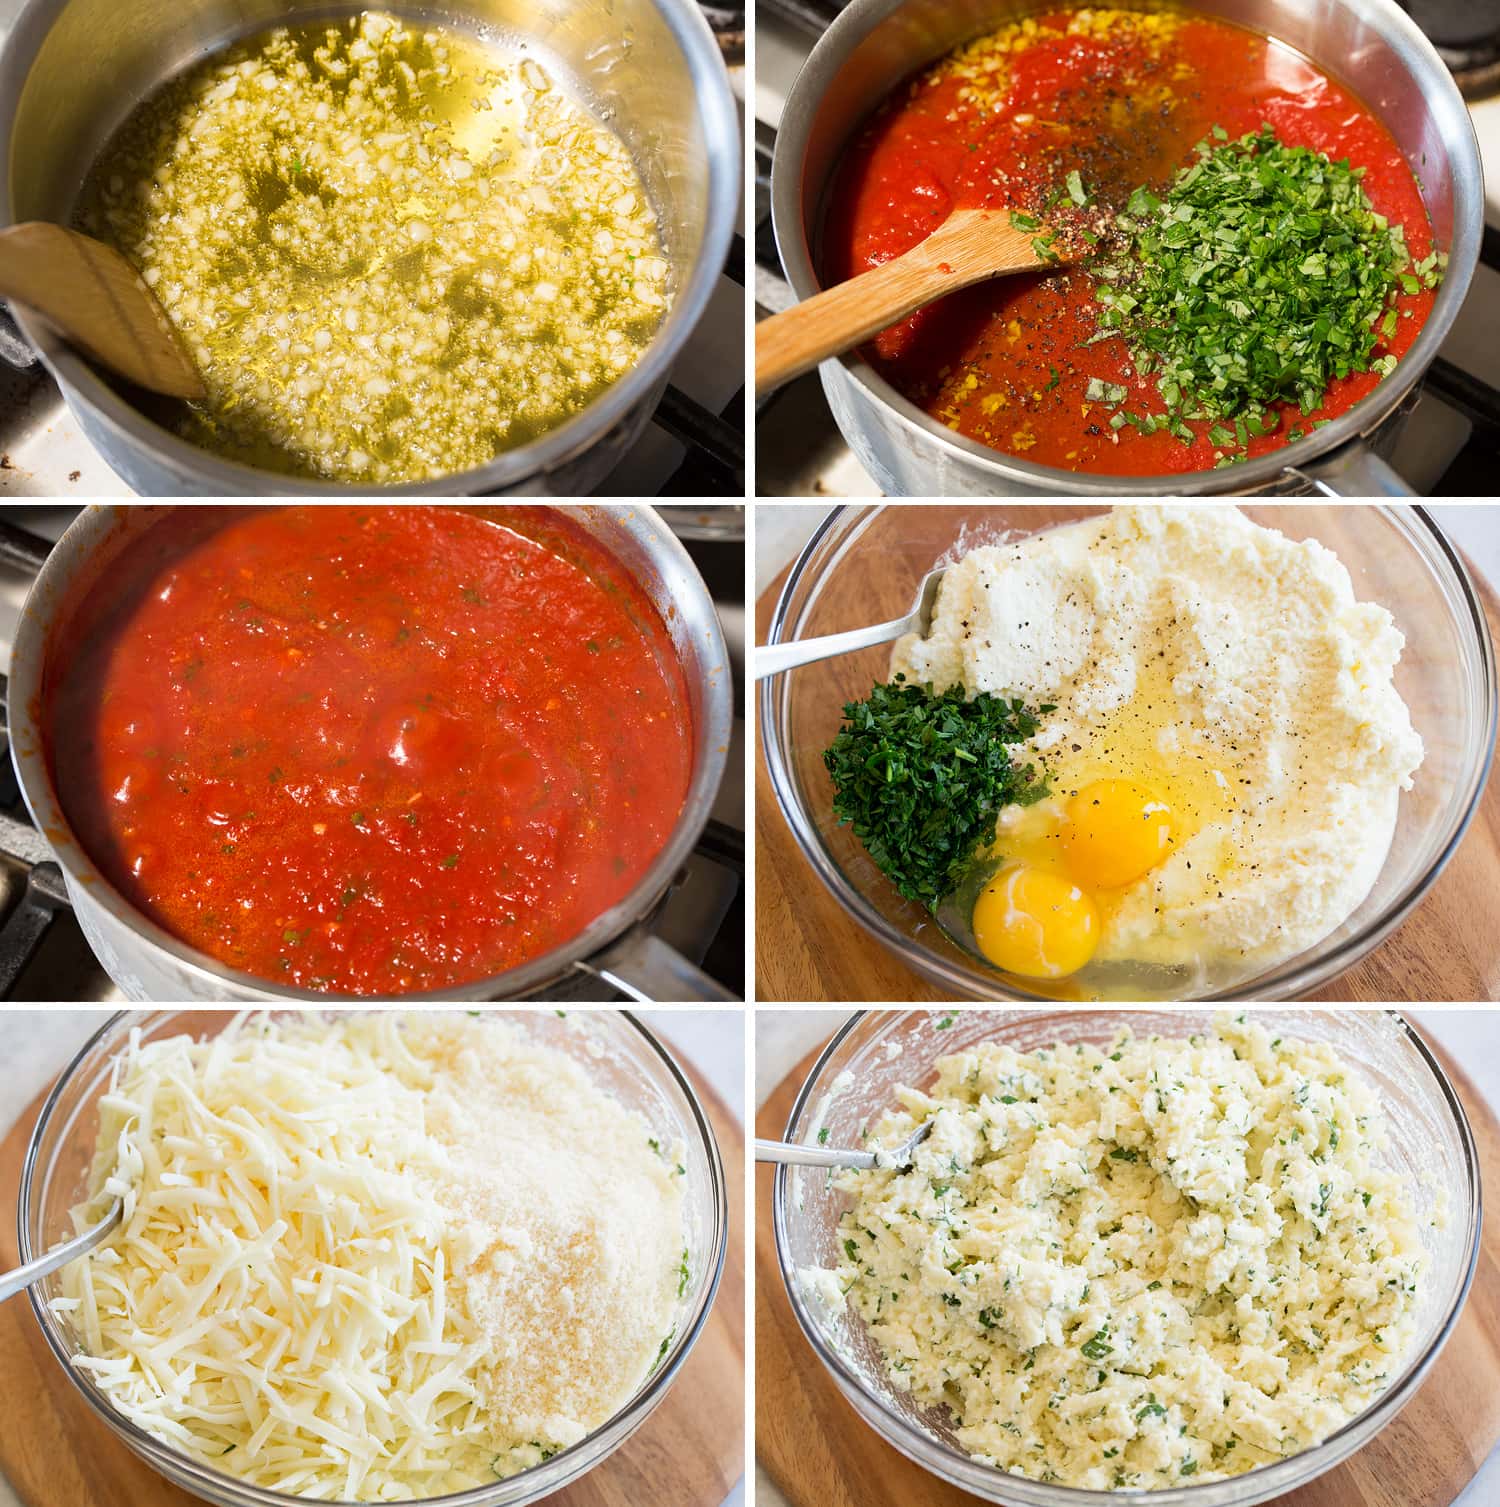 Group of photos showing steps of making marinara in sauce pan and ricotta cheese filling for manicotti.